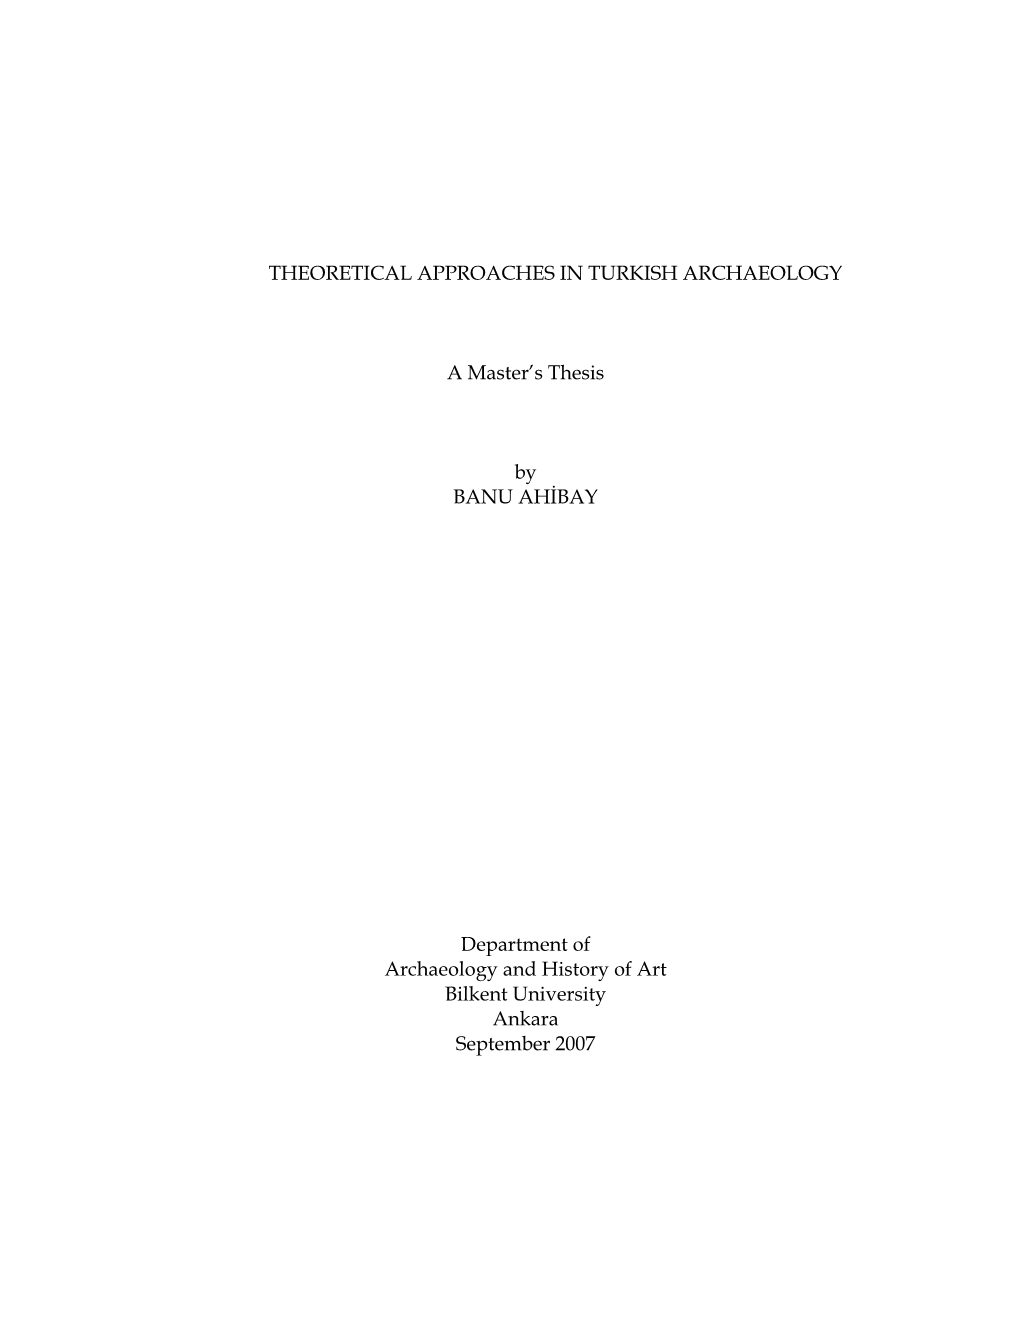 THEORETICAL APPROACHES in TURKISH ARCHAEOLOGY Ahibay, Banu M.A., Department of Archaeology and History of Art Supervisor: Dr